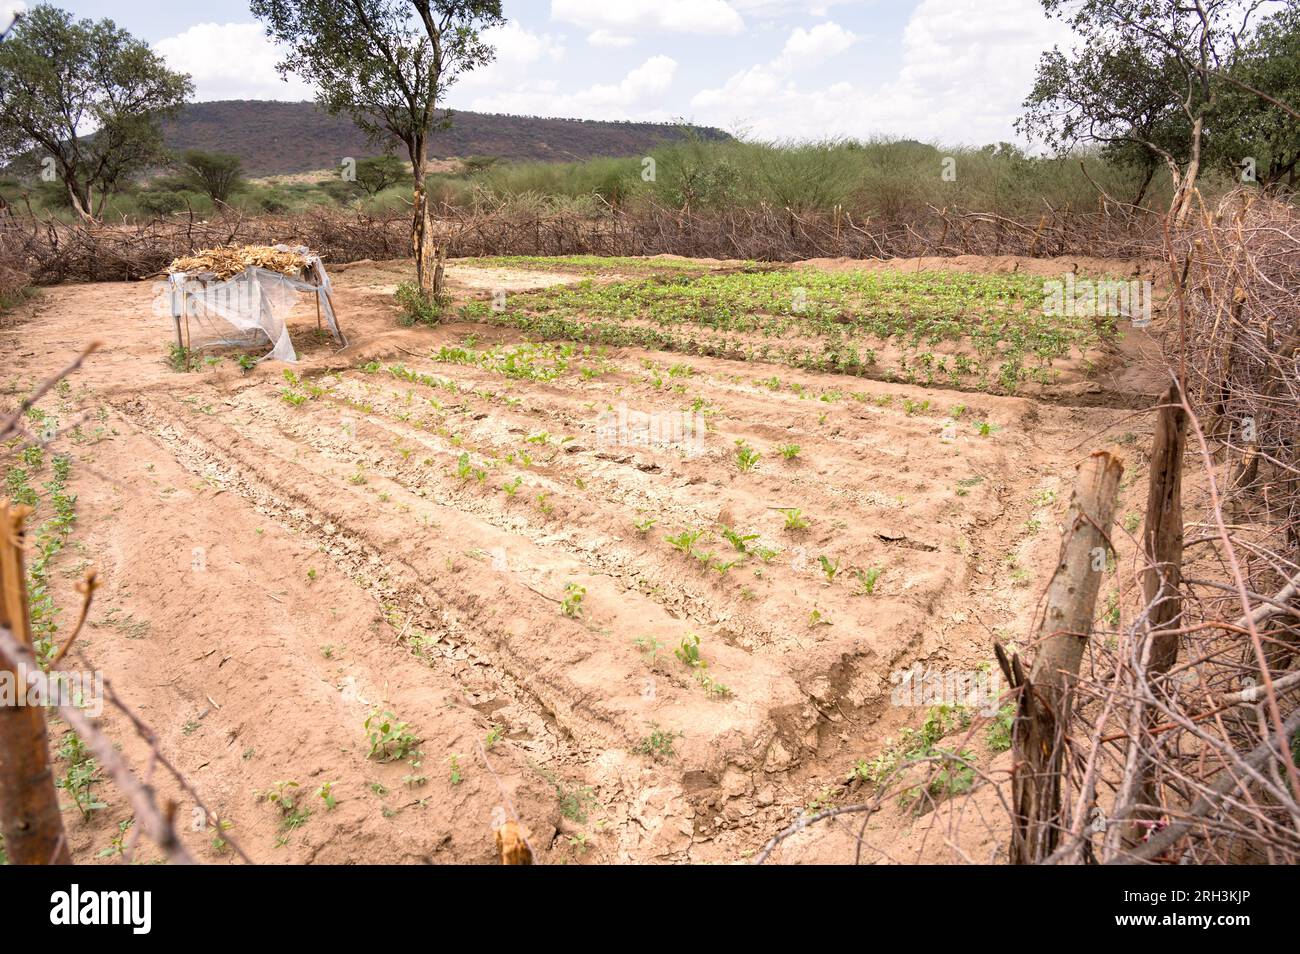 A small patch of farmland growing vegetables surrounded by acacia fencing, watered by water from nearby bore hole, Baringo county, Kenya Stock Photo